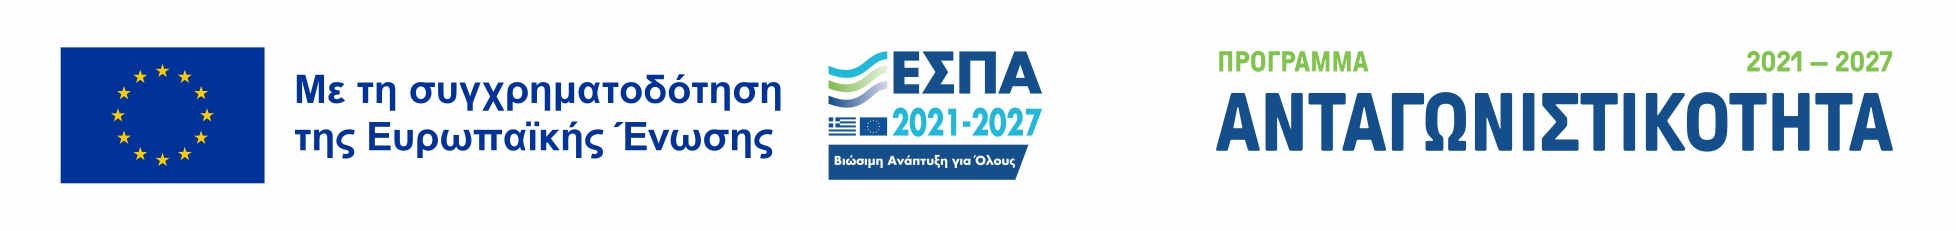 Program 2021-2027 Competitiveness, Co-Funded by the European union